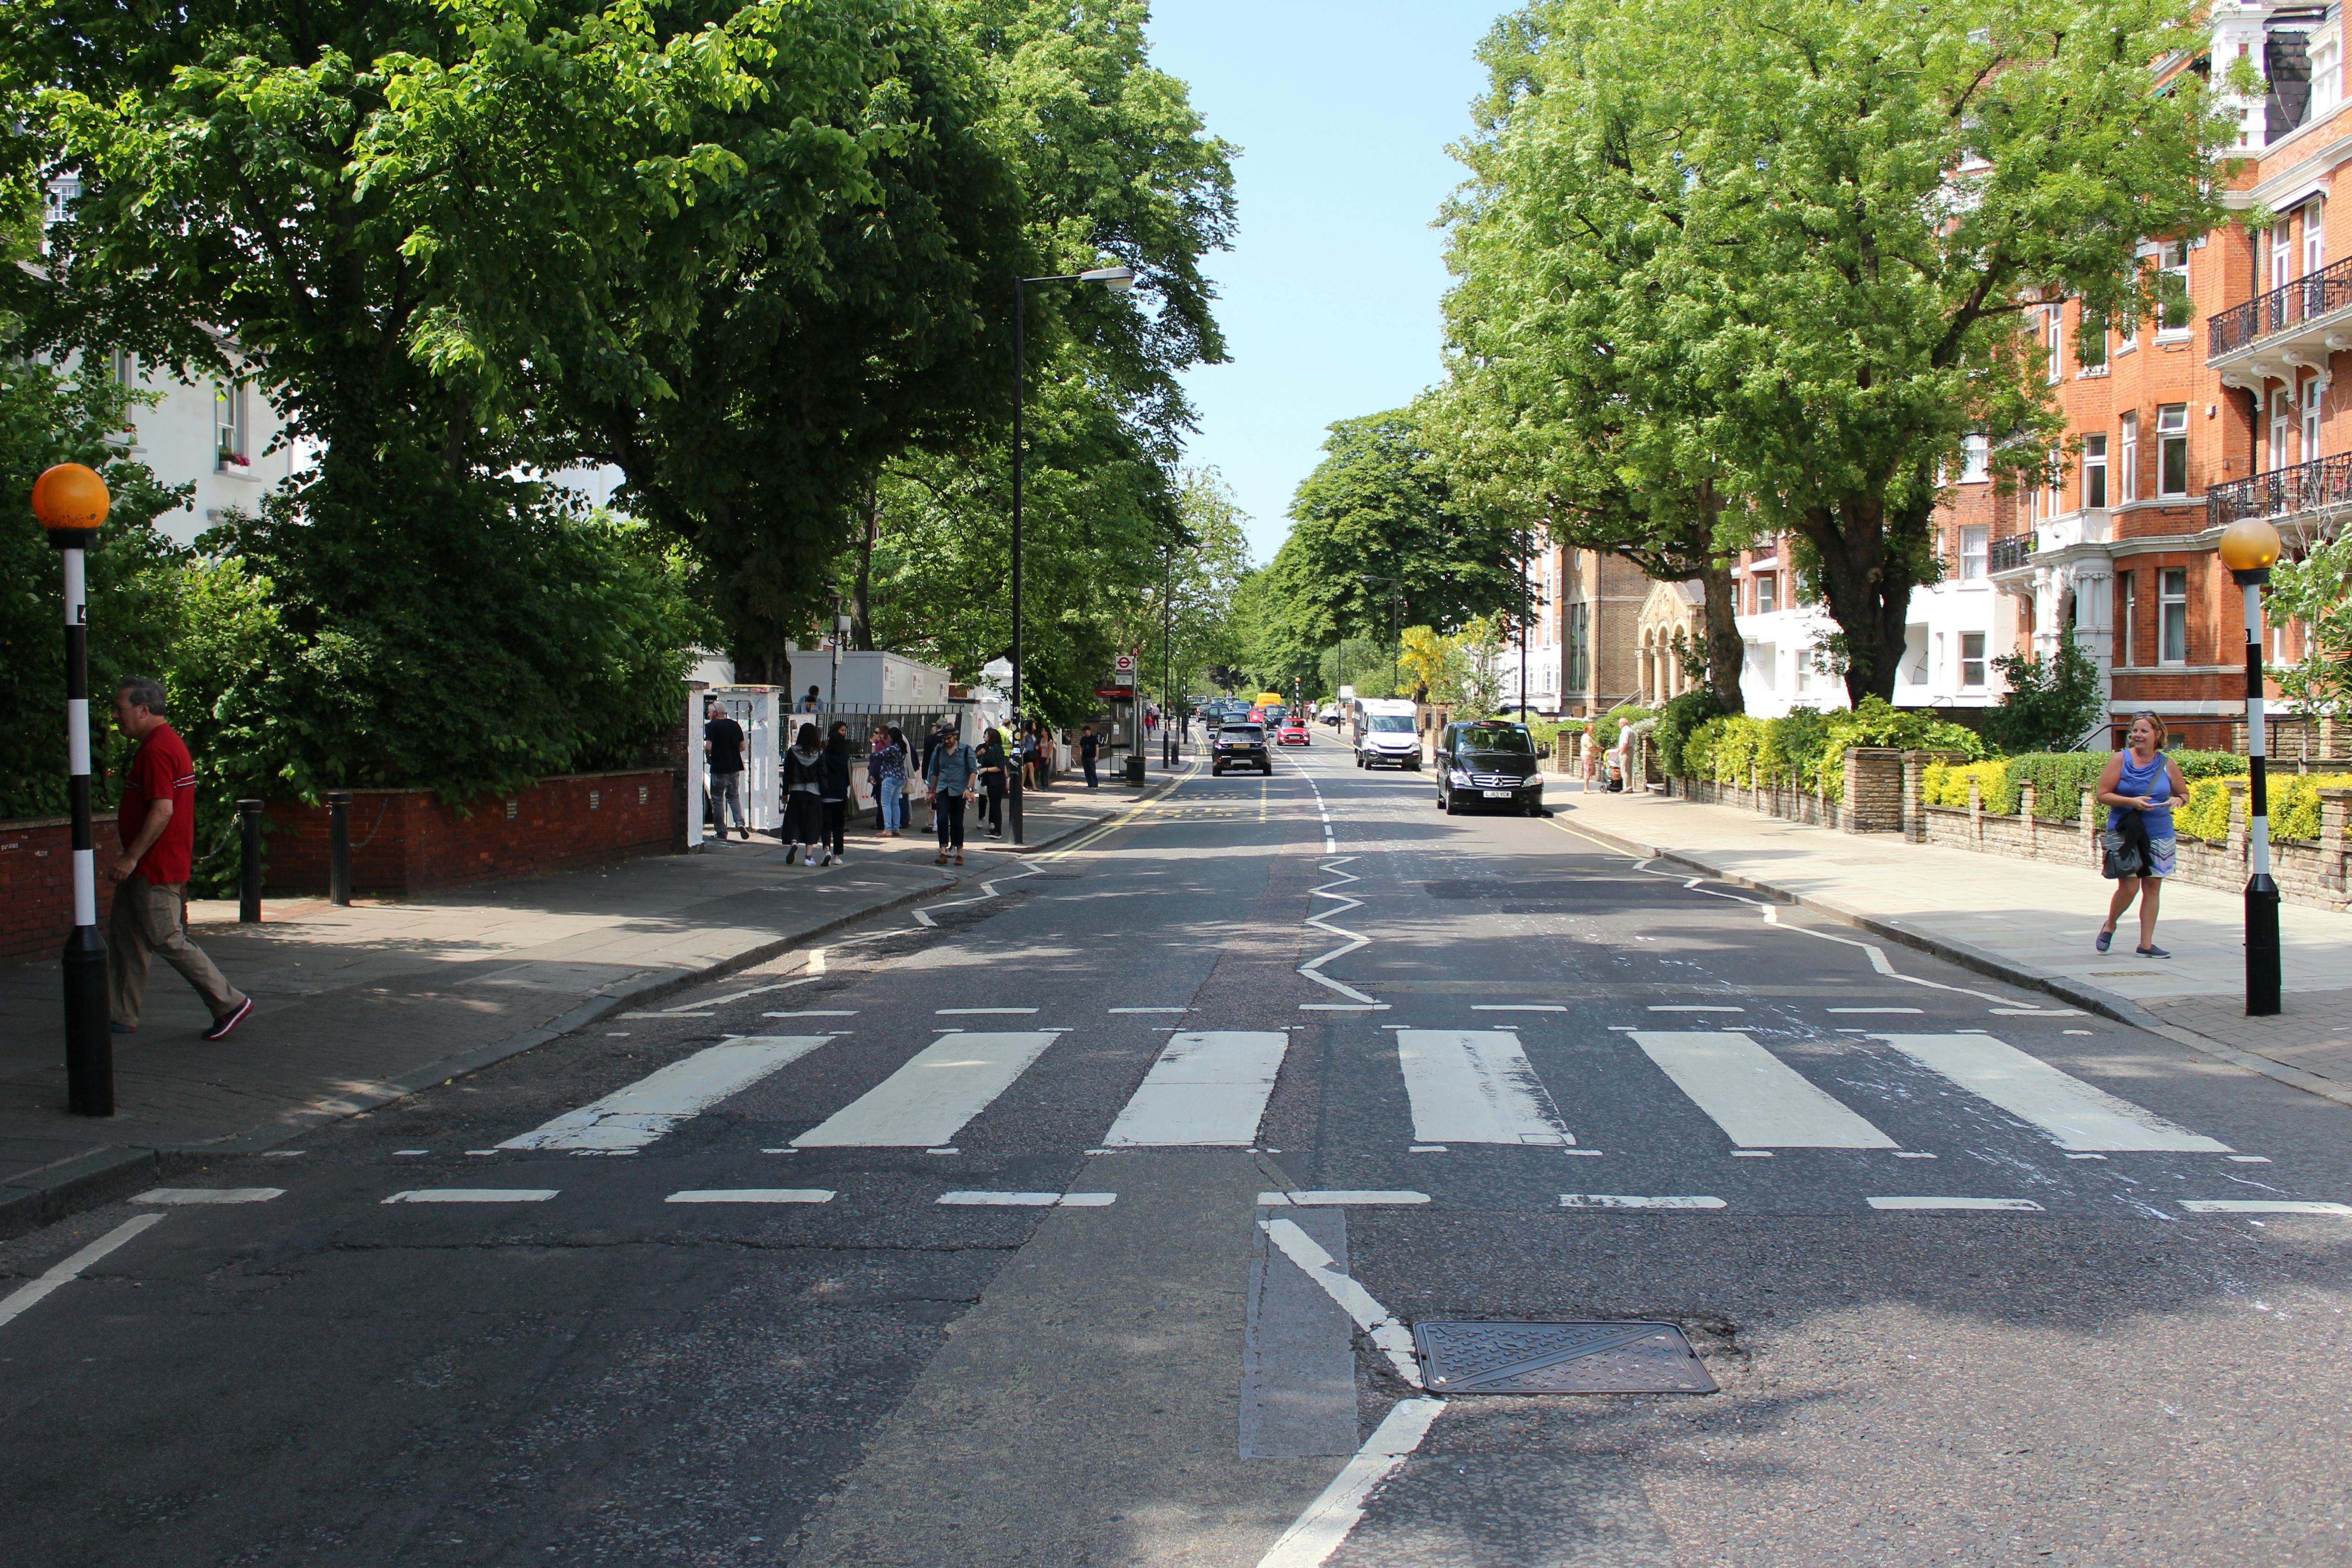 Beatles magical mystery walking tour of Marylebone and Abbey Road